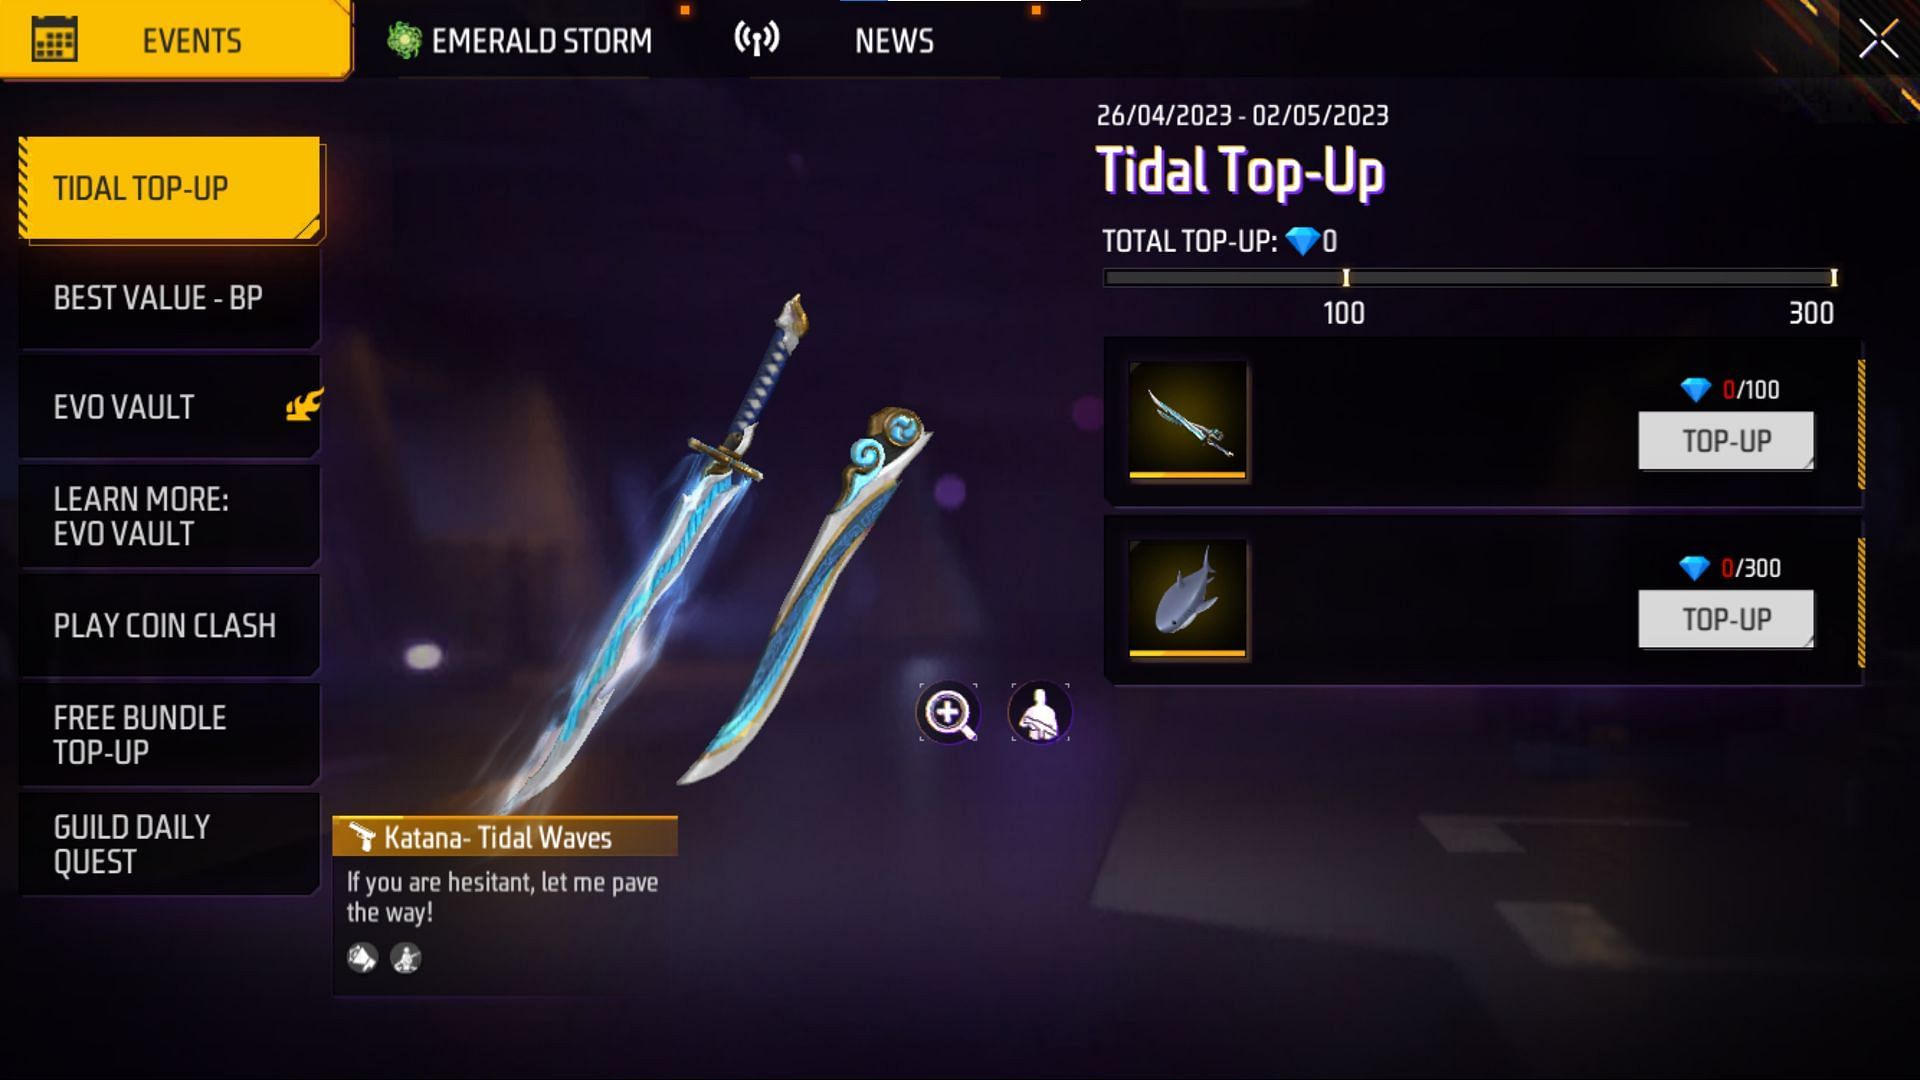 The new Tidal Top-Up event will be active in the game until May 2, 2023 (Image via Garena)